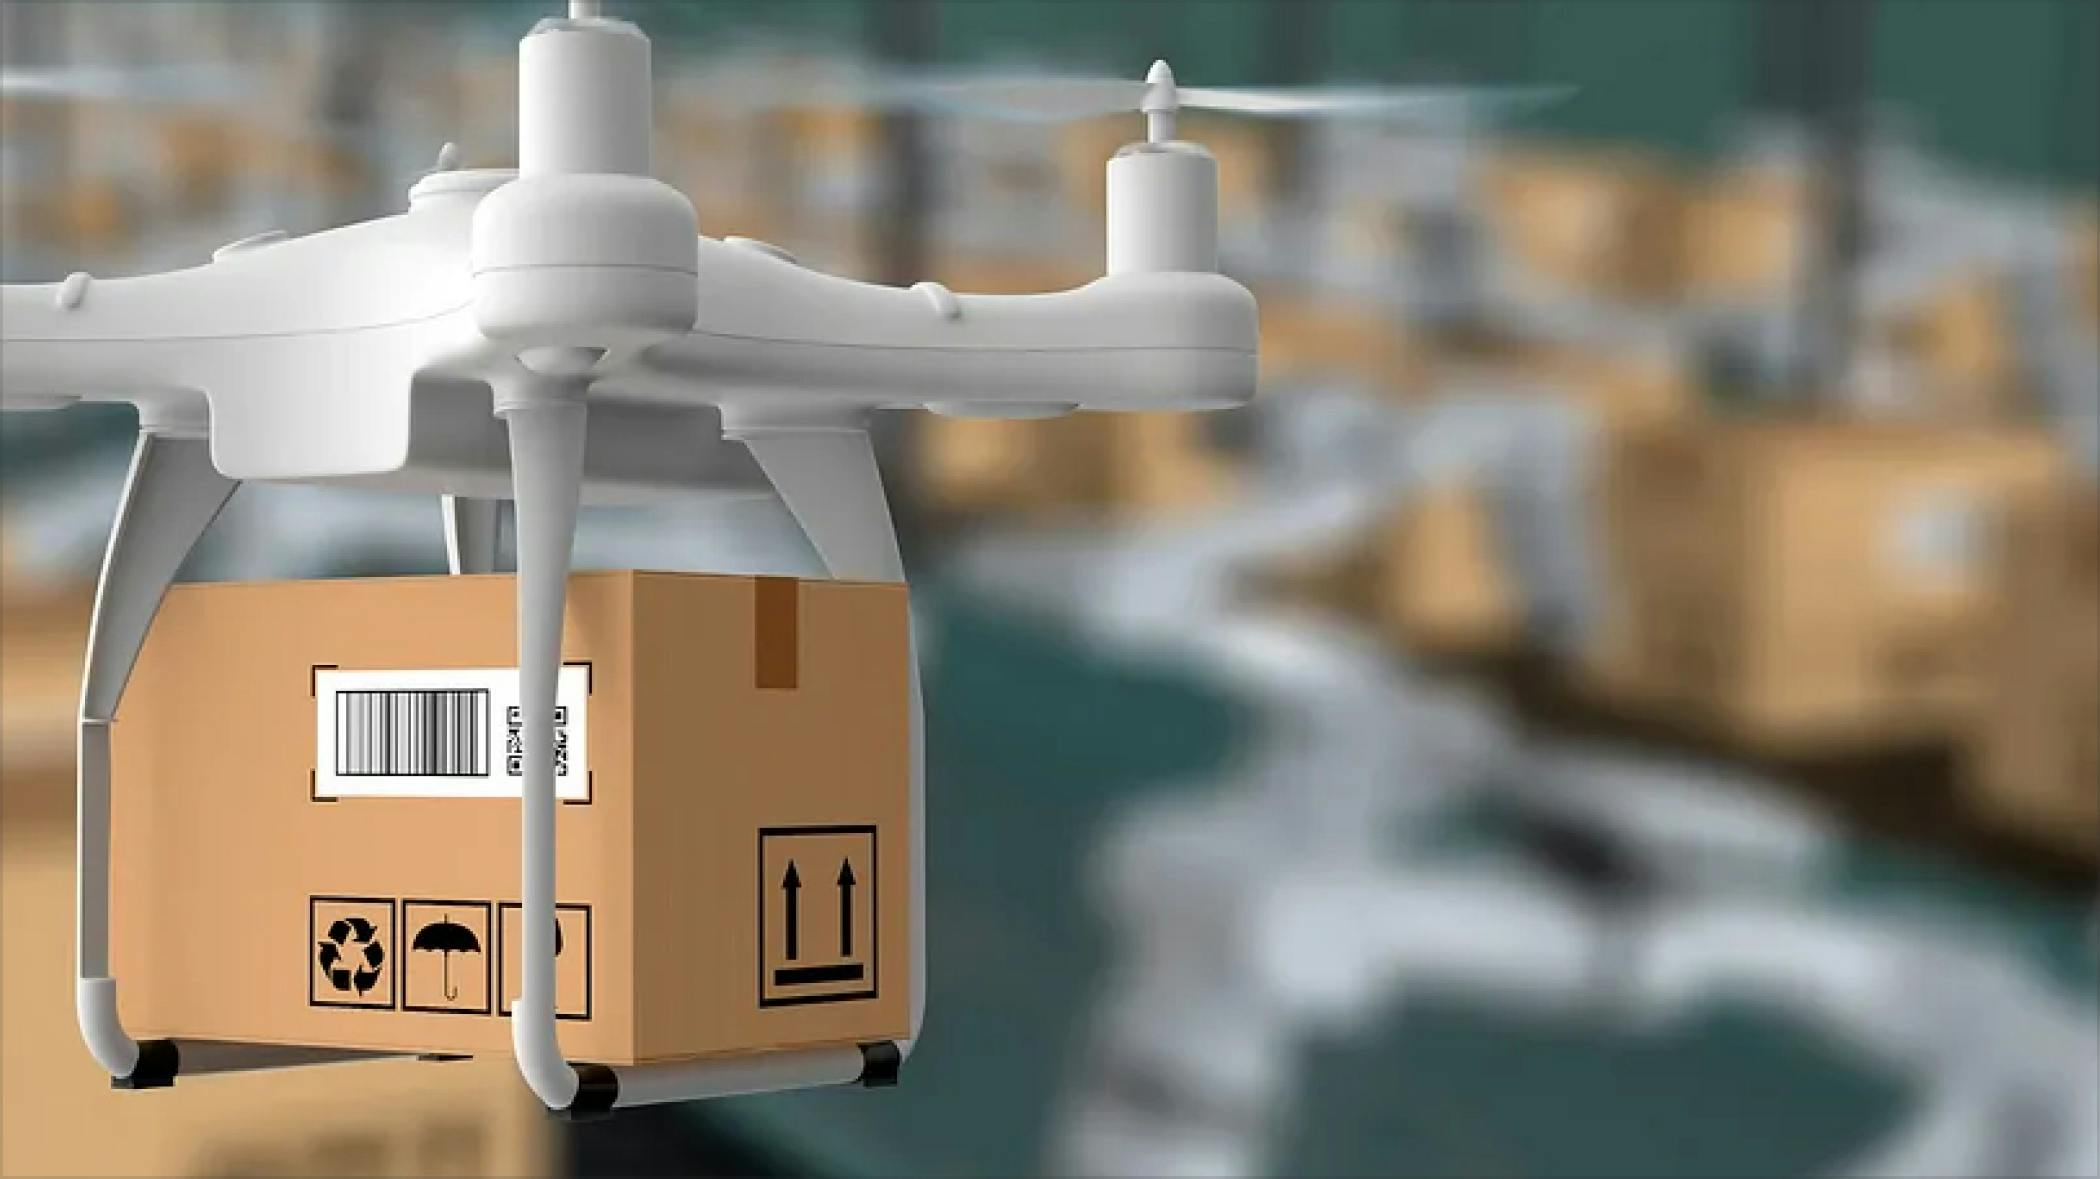 Drone transporting a box